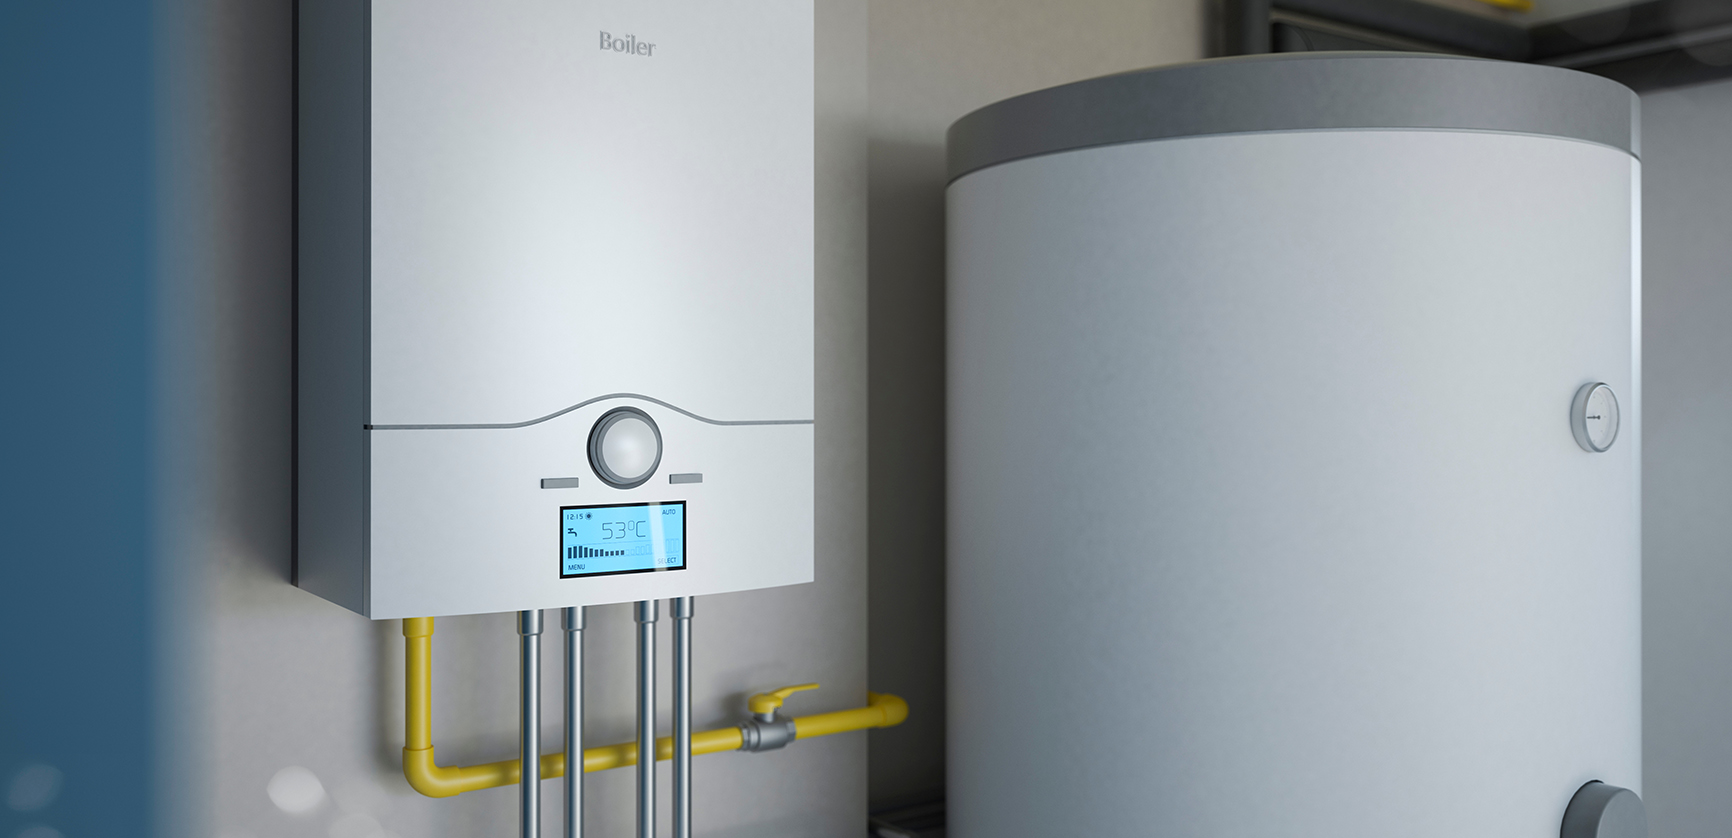 boiler installation and maintenance in Greater London